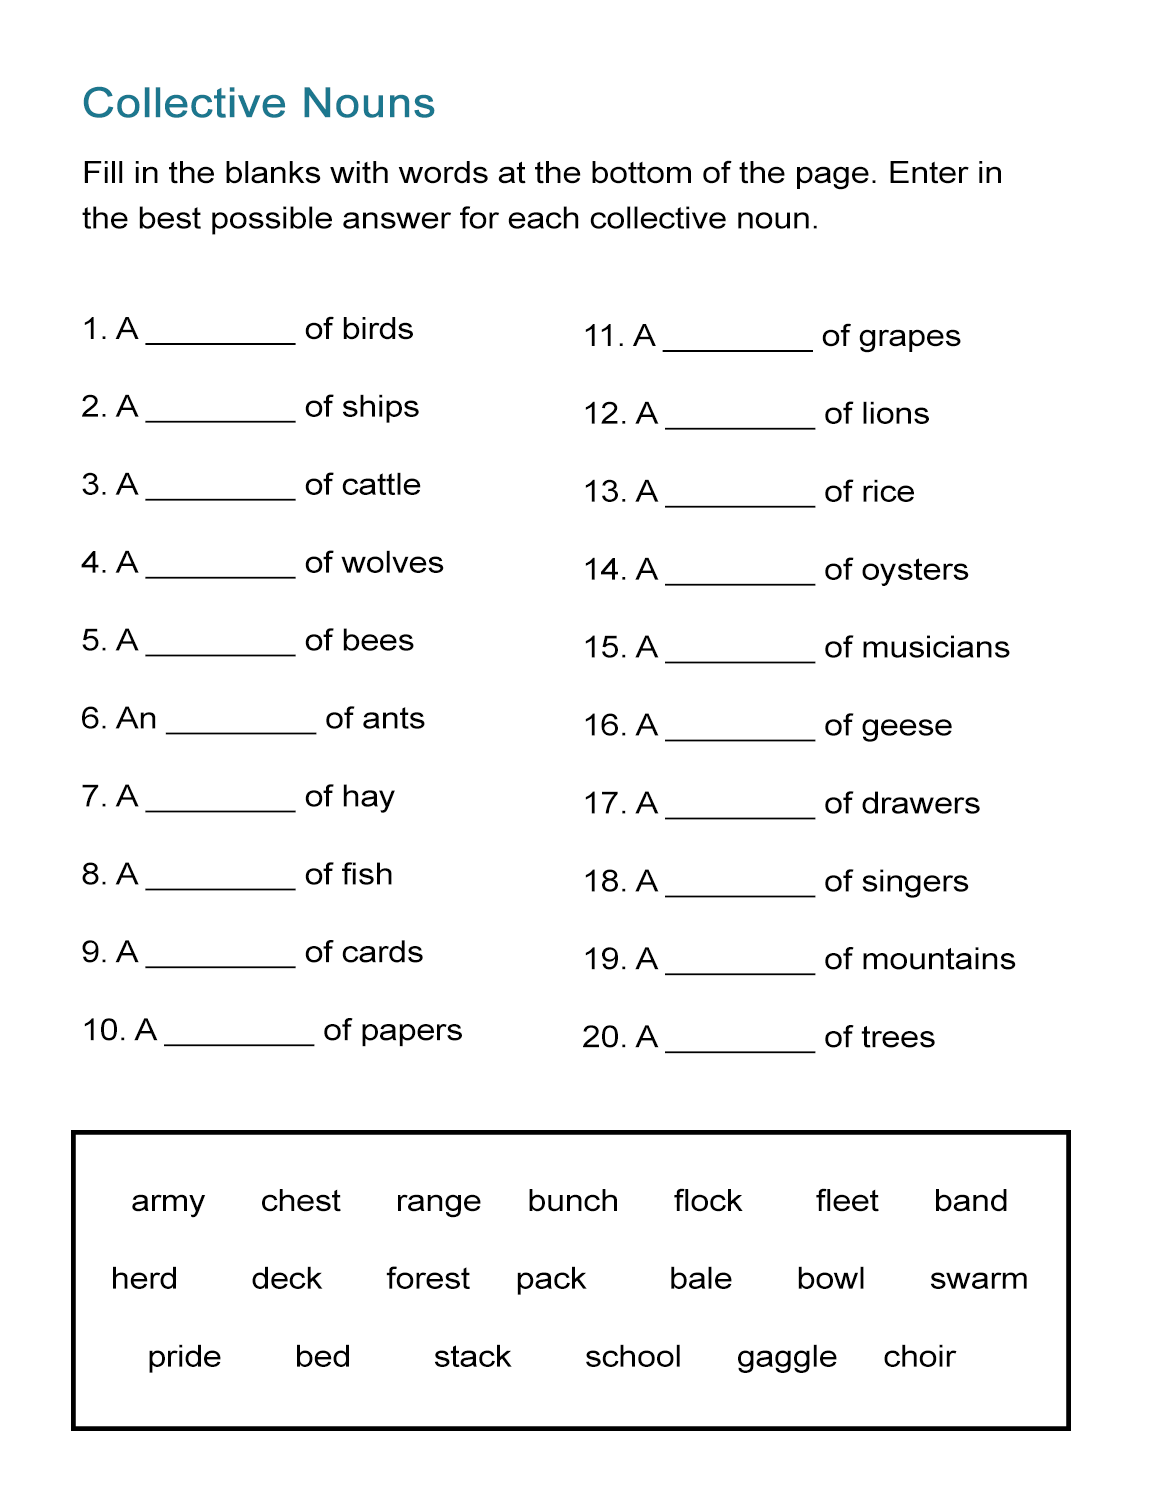 Collective Nouns Worksheet Fill In The Blanks ALL ESL